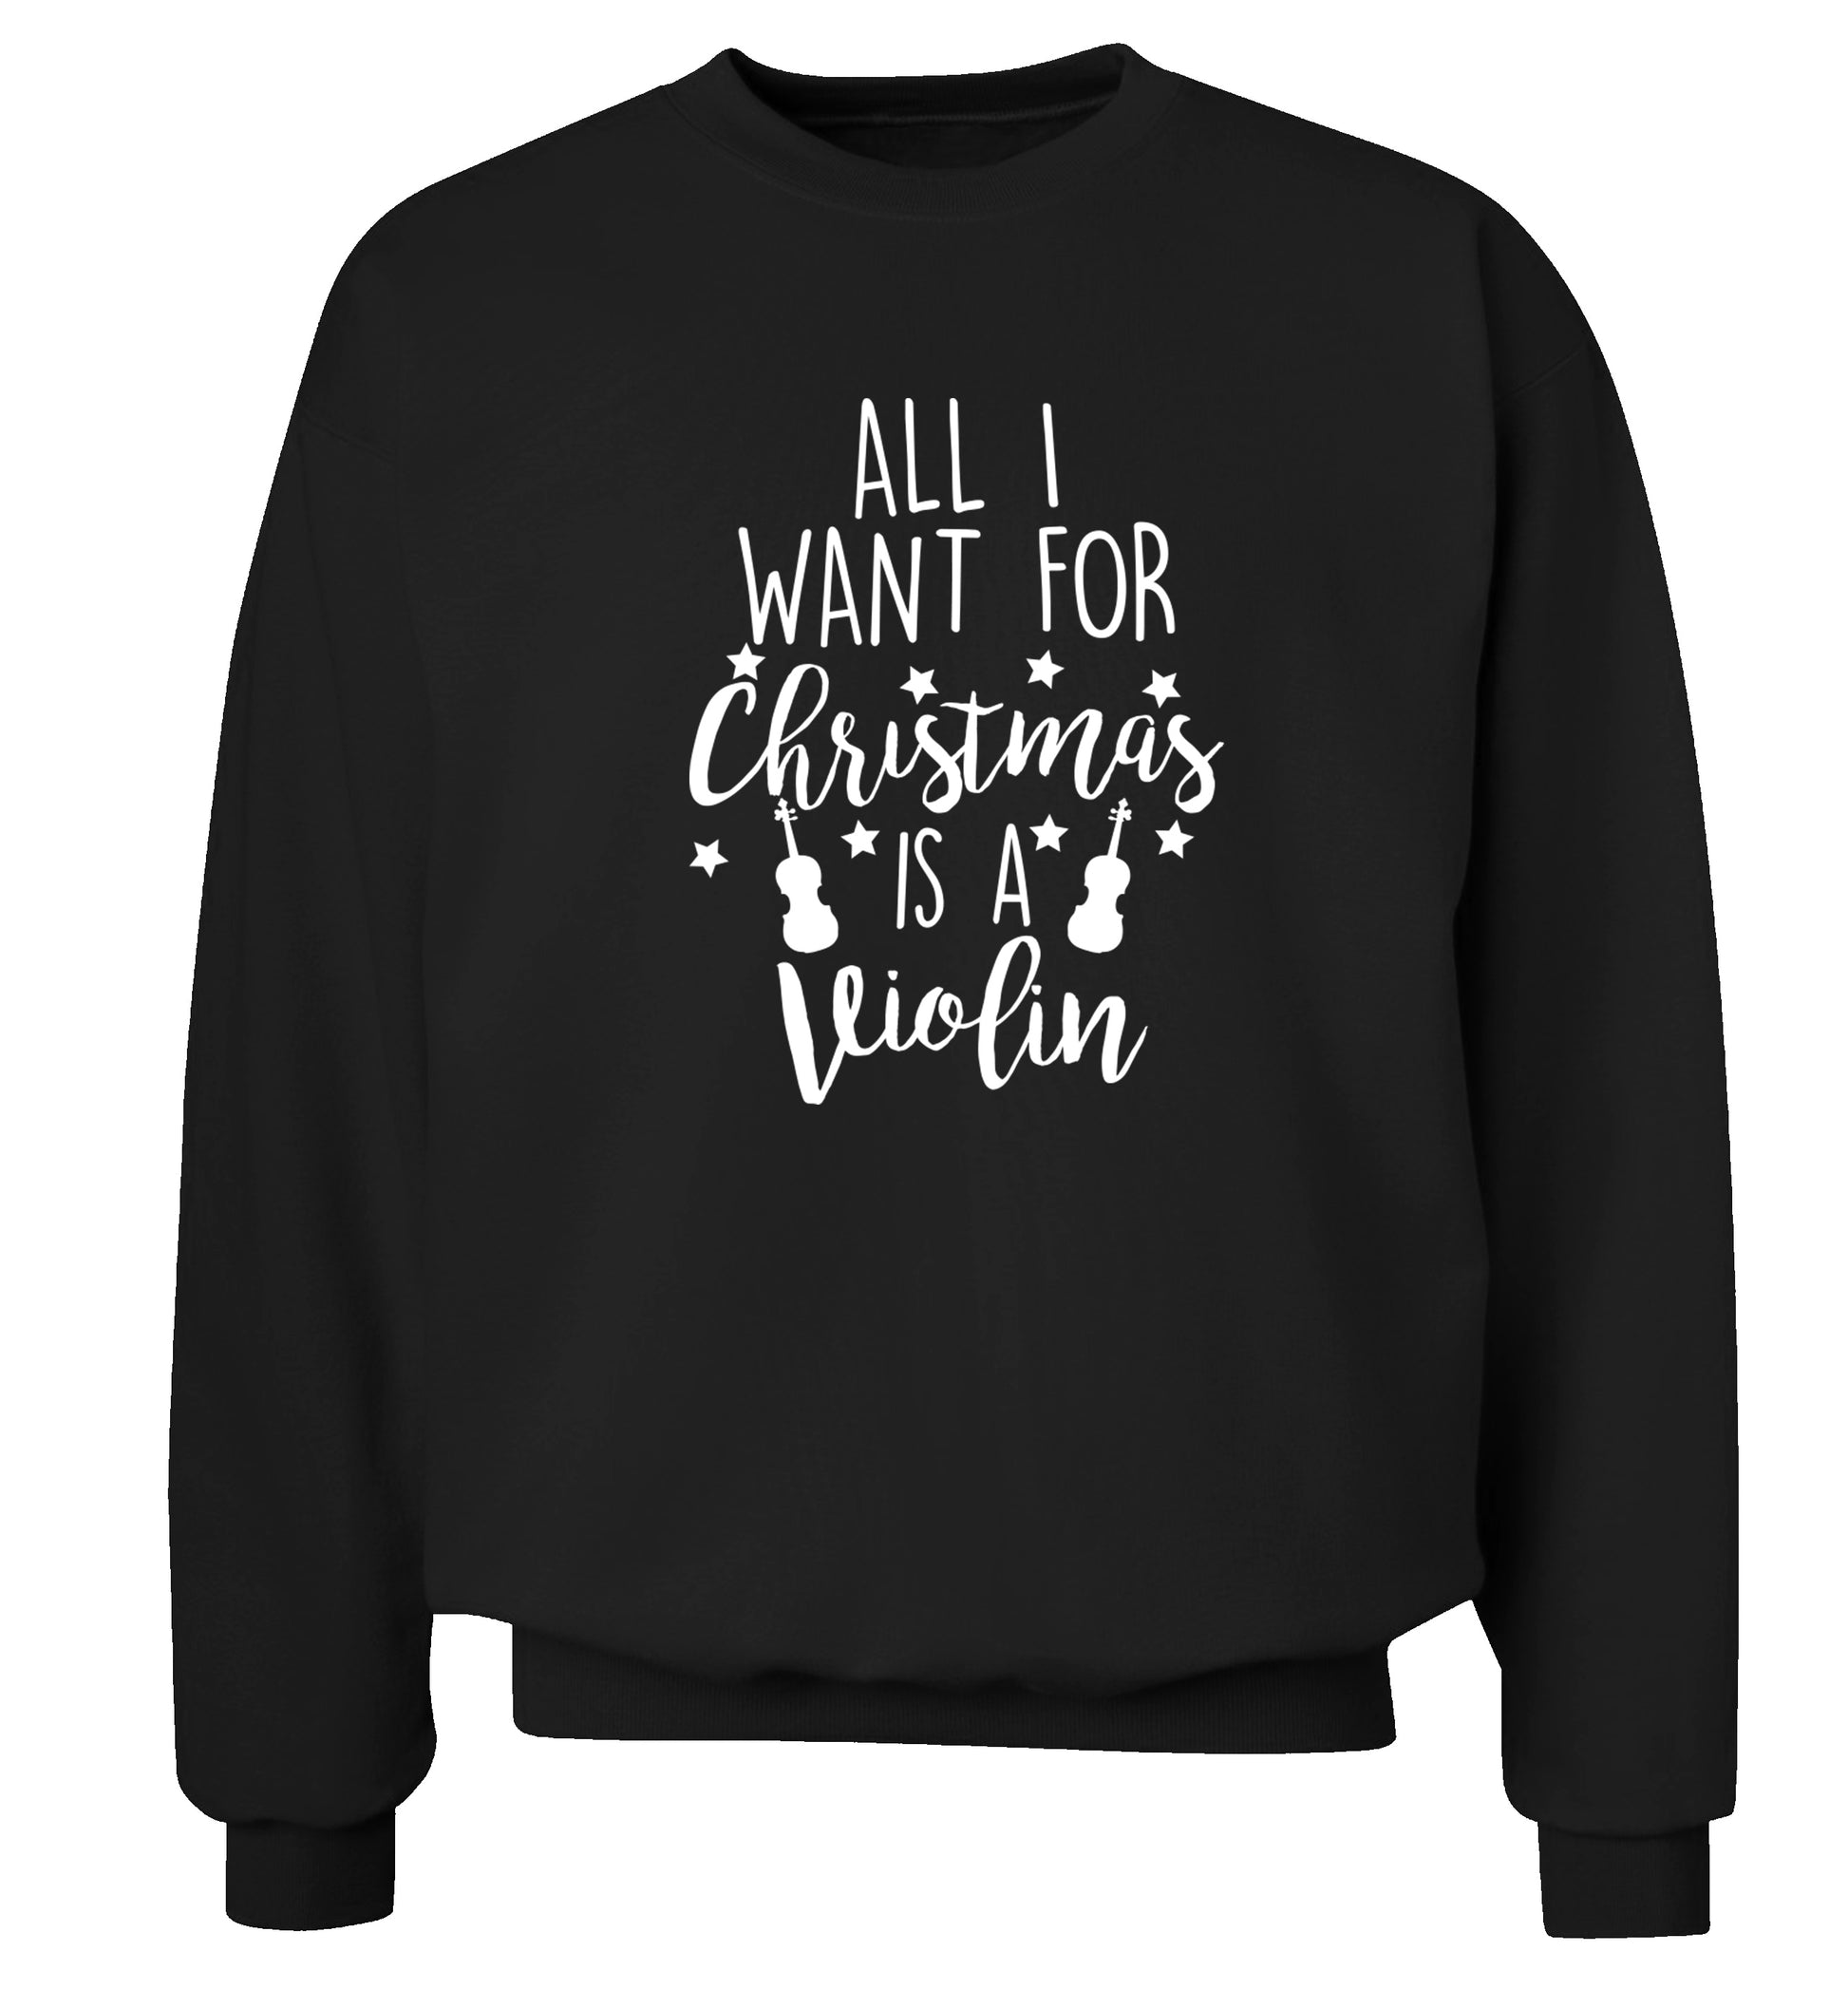 All I Want For Christmas is a Violin Adult's unisex black Sweater 2XL